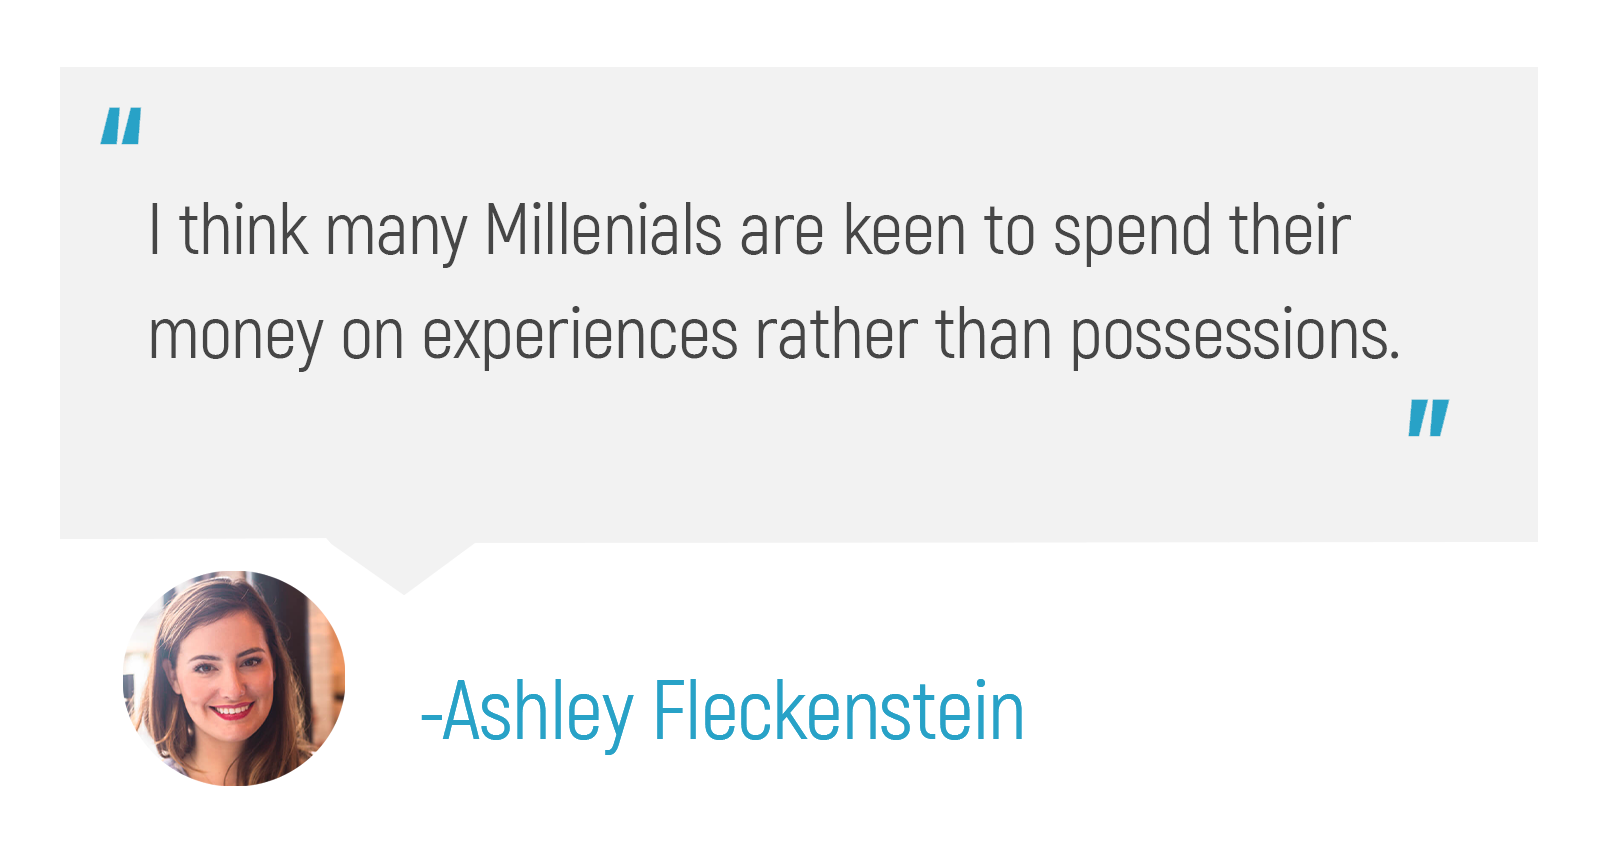 "I think many Millenials are keen to spend their money on experiences rather than possessions."